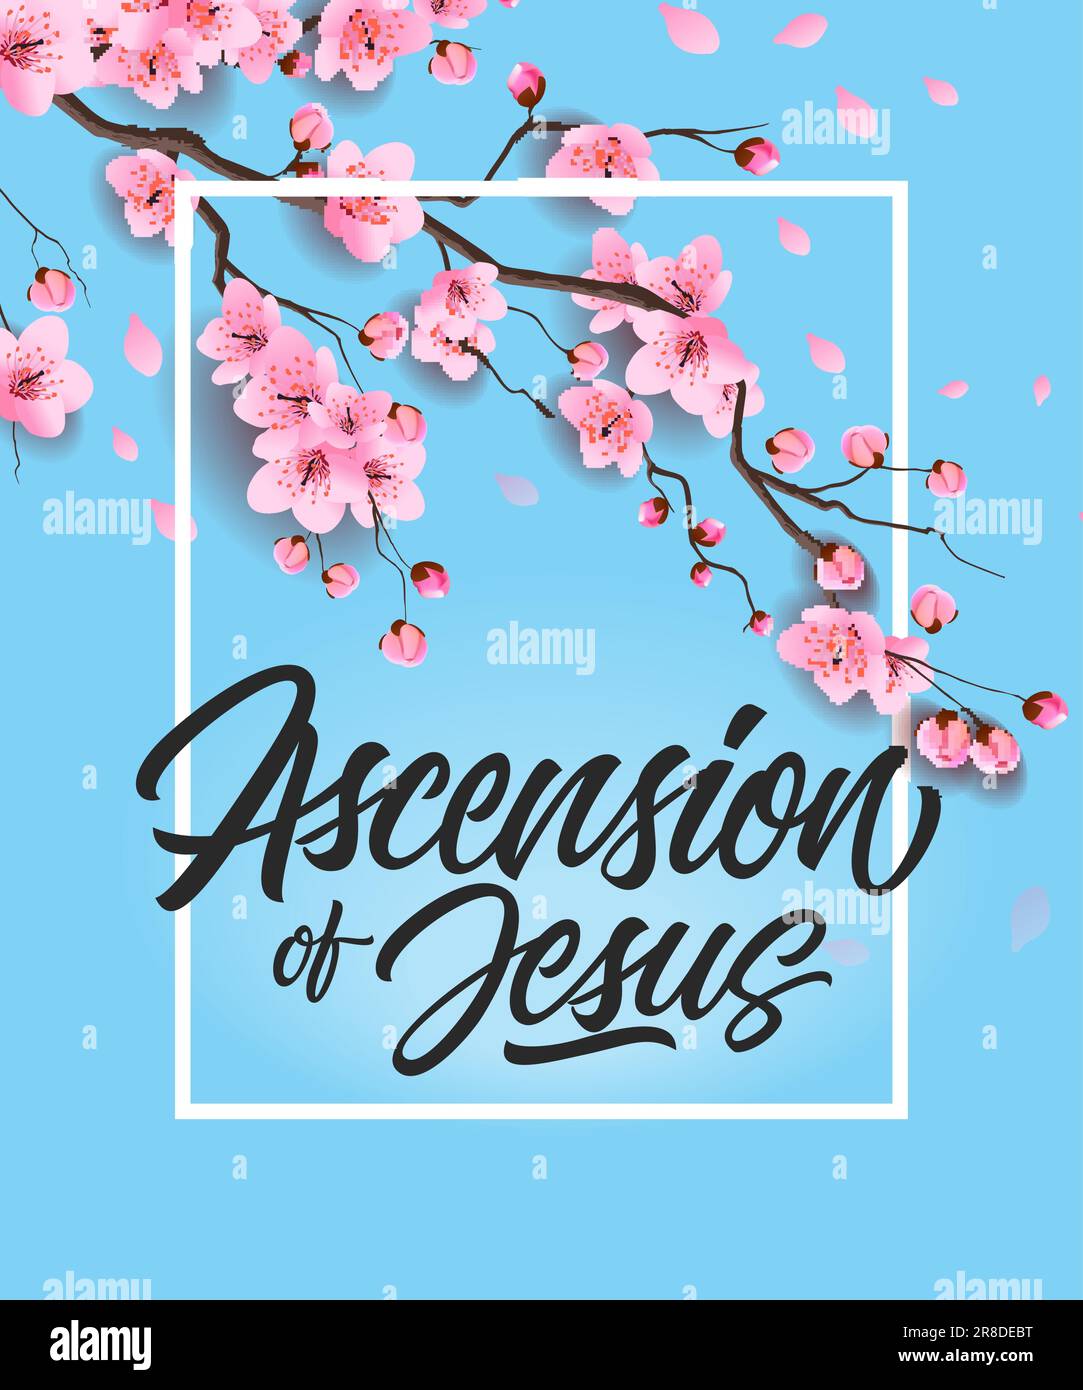 Ascension of Jesus Poster with Cherry Tree Stock Vector